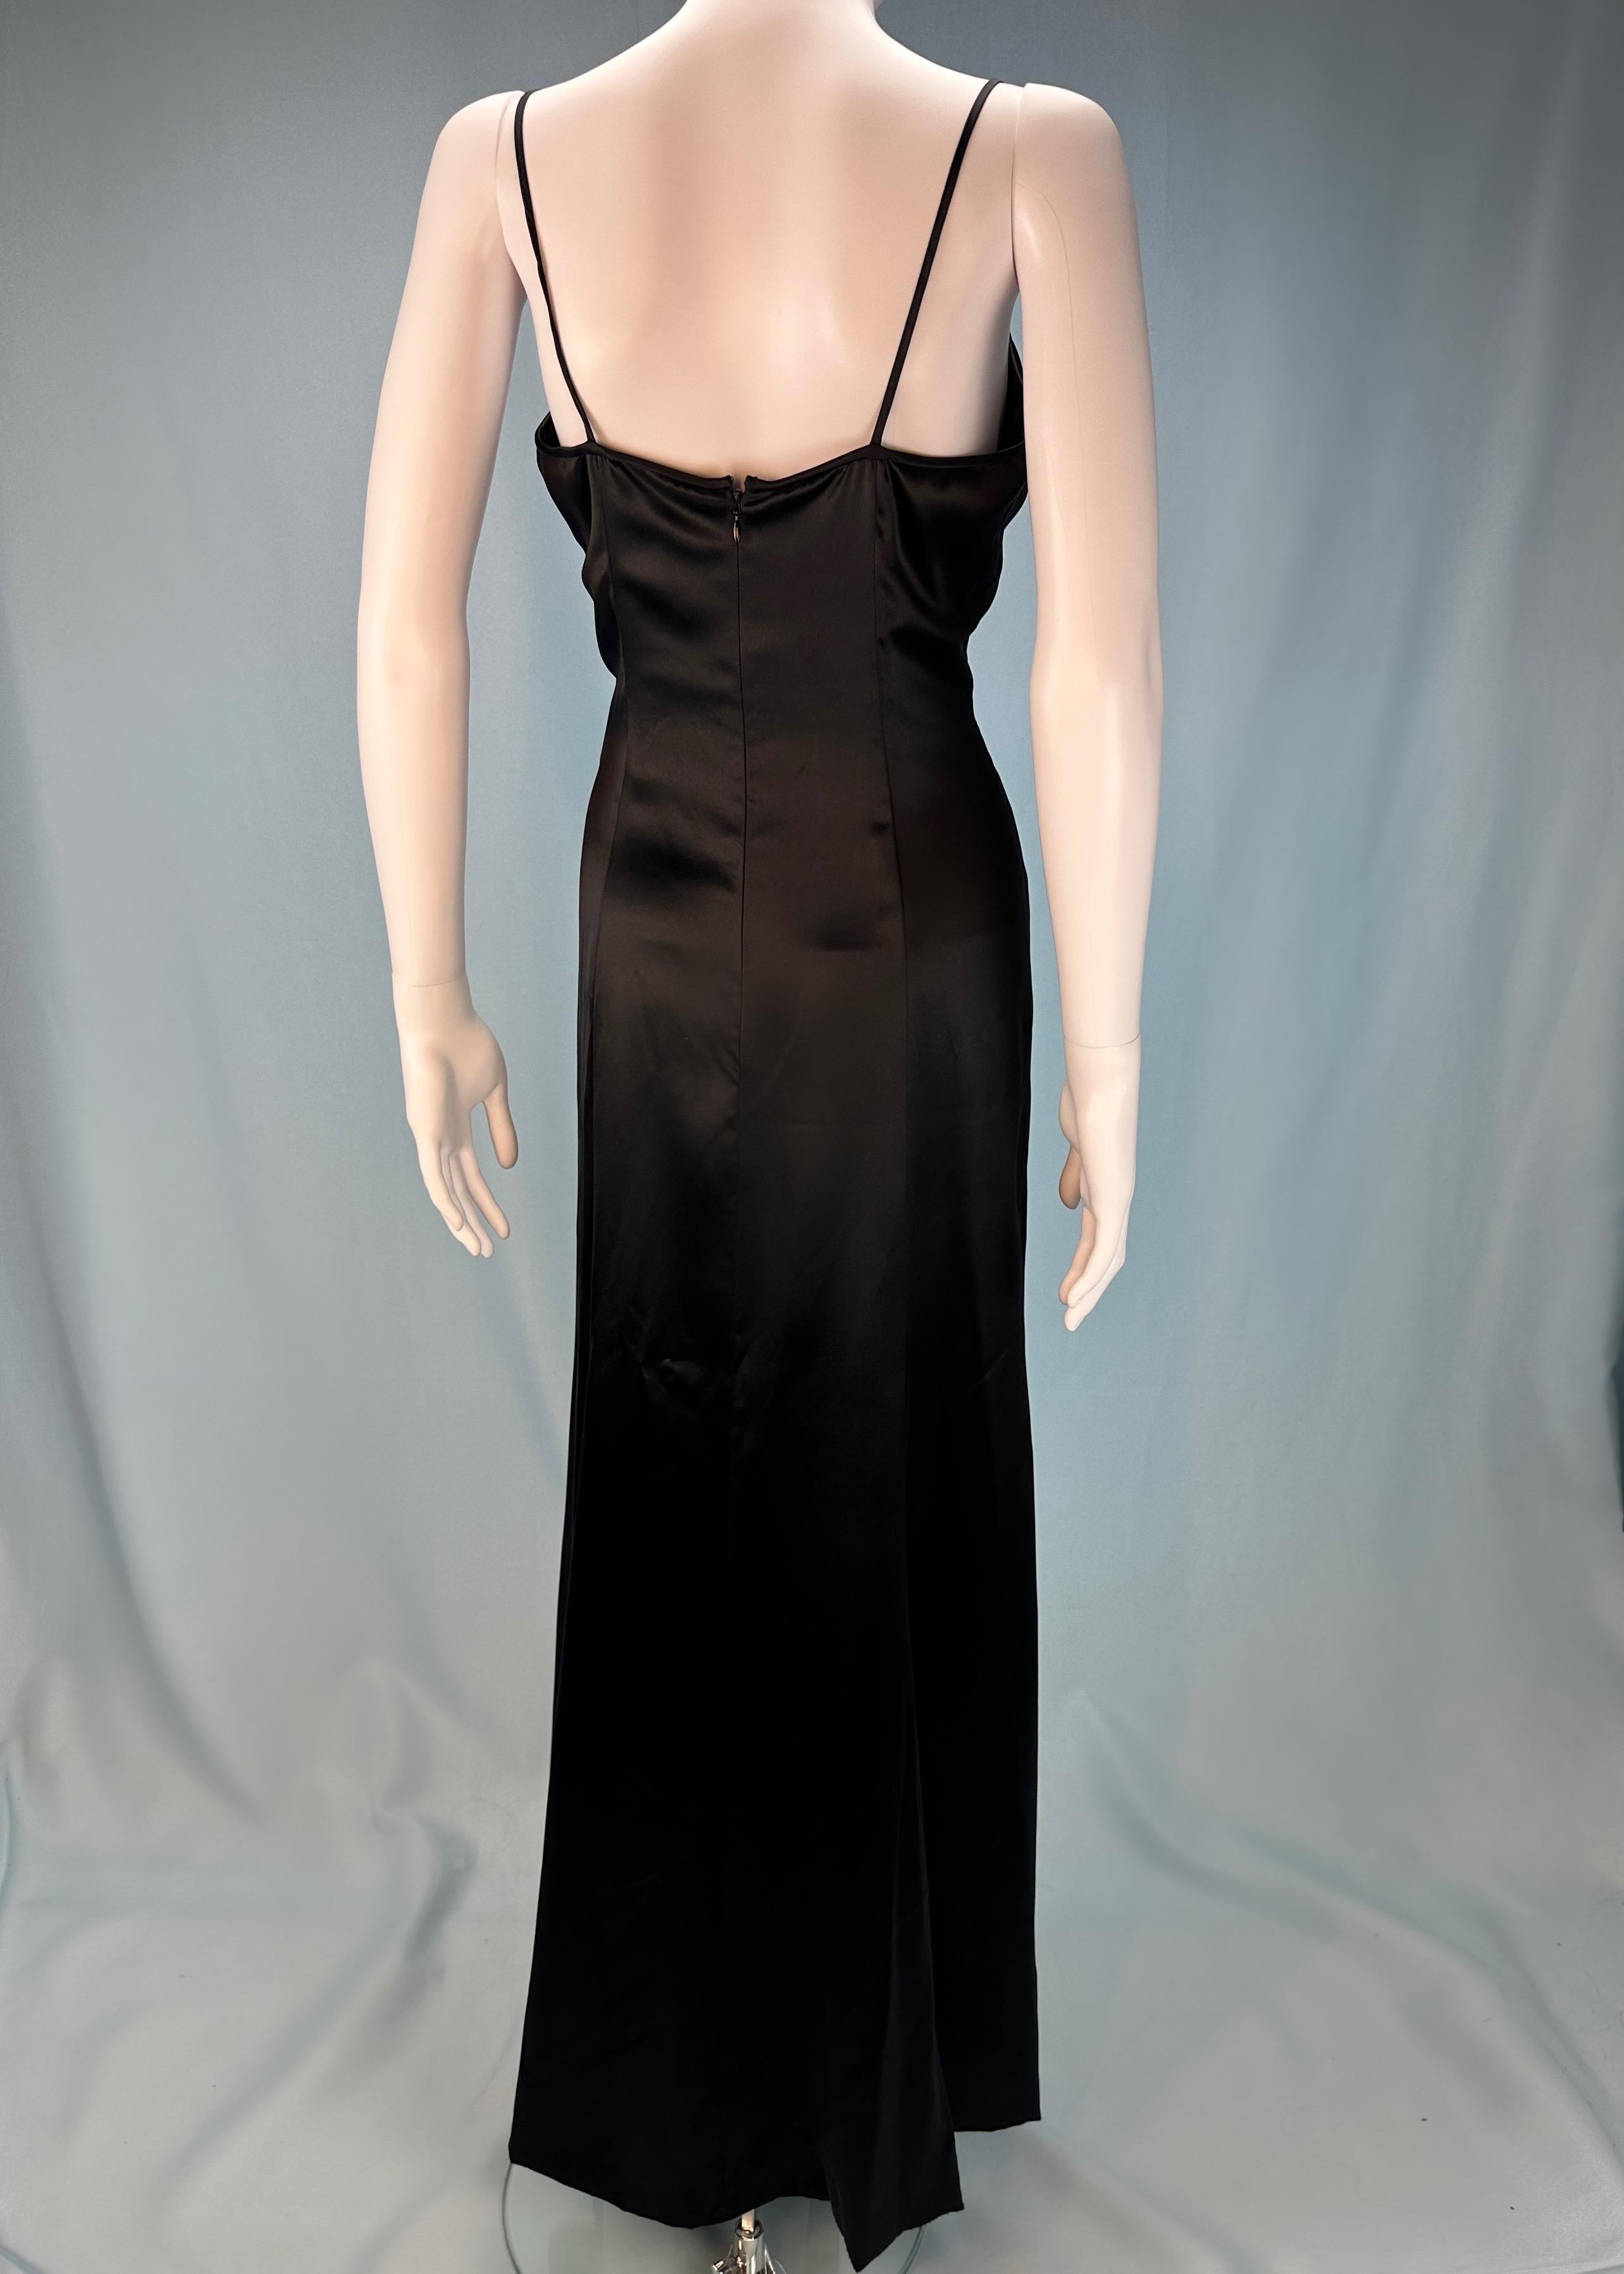 Vintage Chanel
by Karl Lagerfeld
Fall 1995
Black silk satin full length dress
Slightly flared A line skirt
Fully lined
Zip up back
100% silk 
Size EU 42 / UK 14 / US 10 
Clipped back on model in images  

Measurements - 
Chest 35” 
Waist 30.25”
Hips